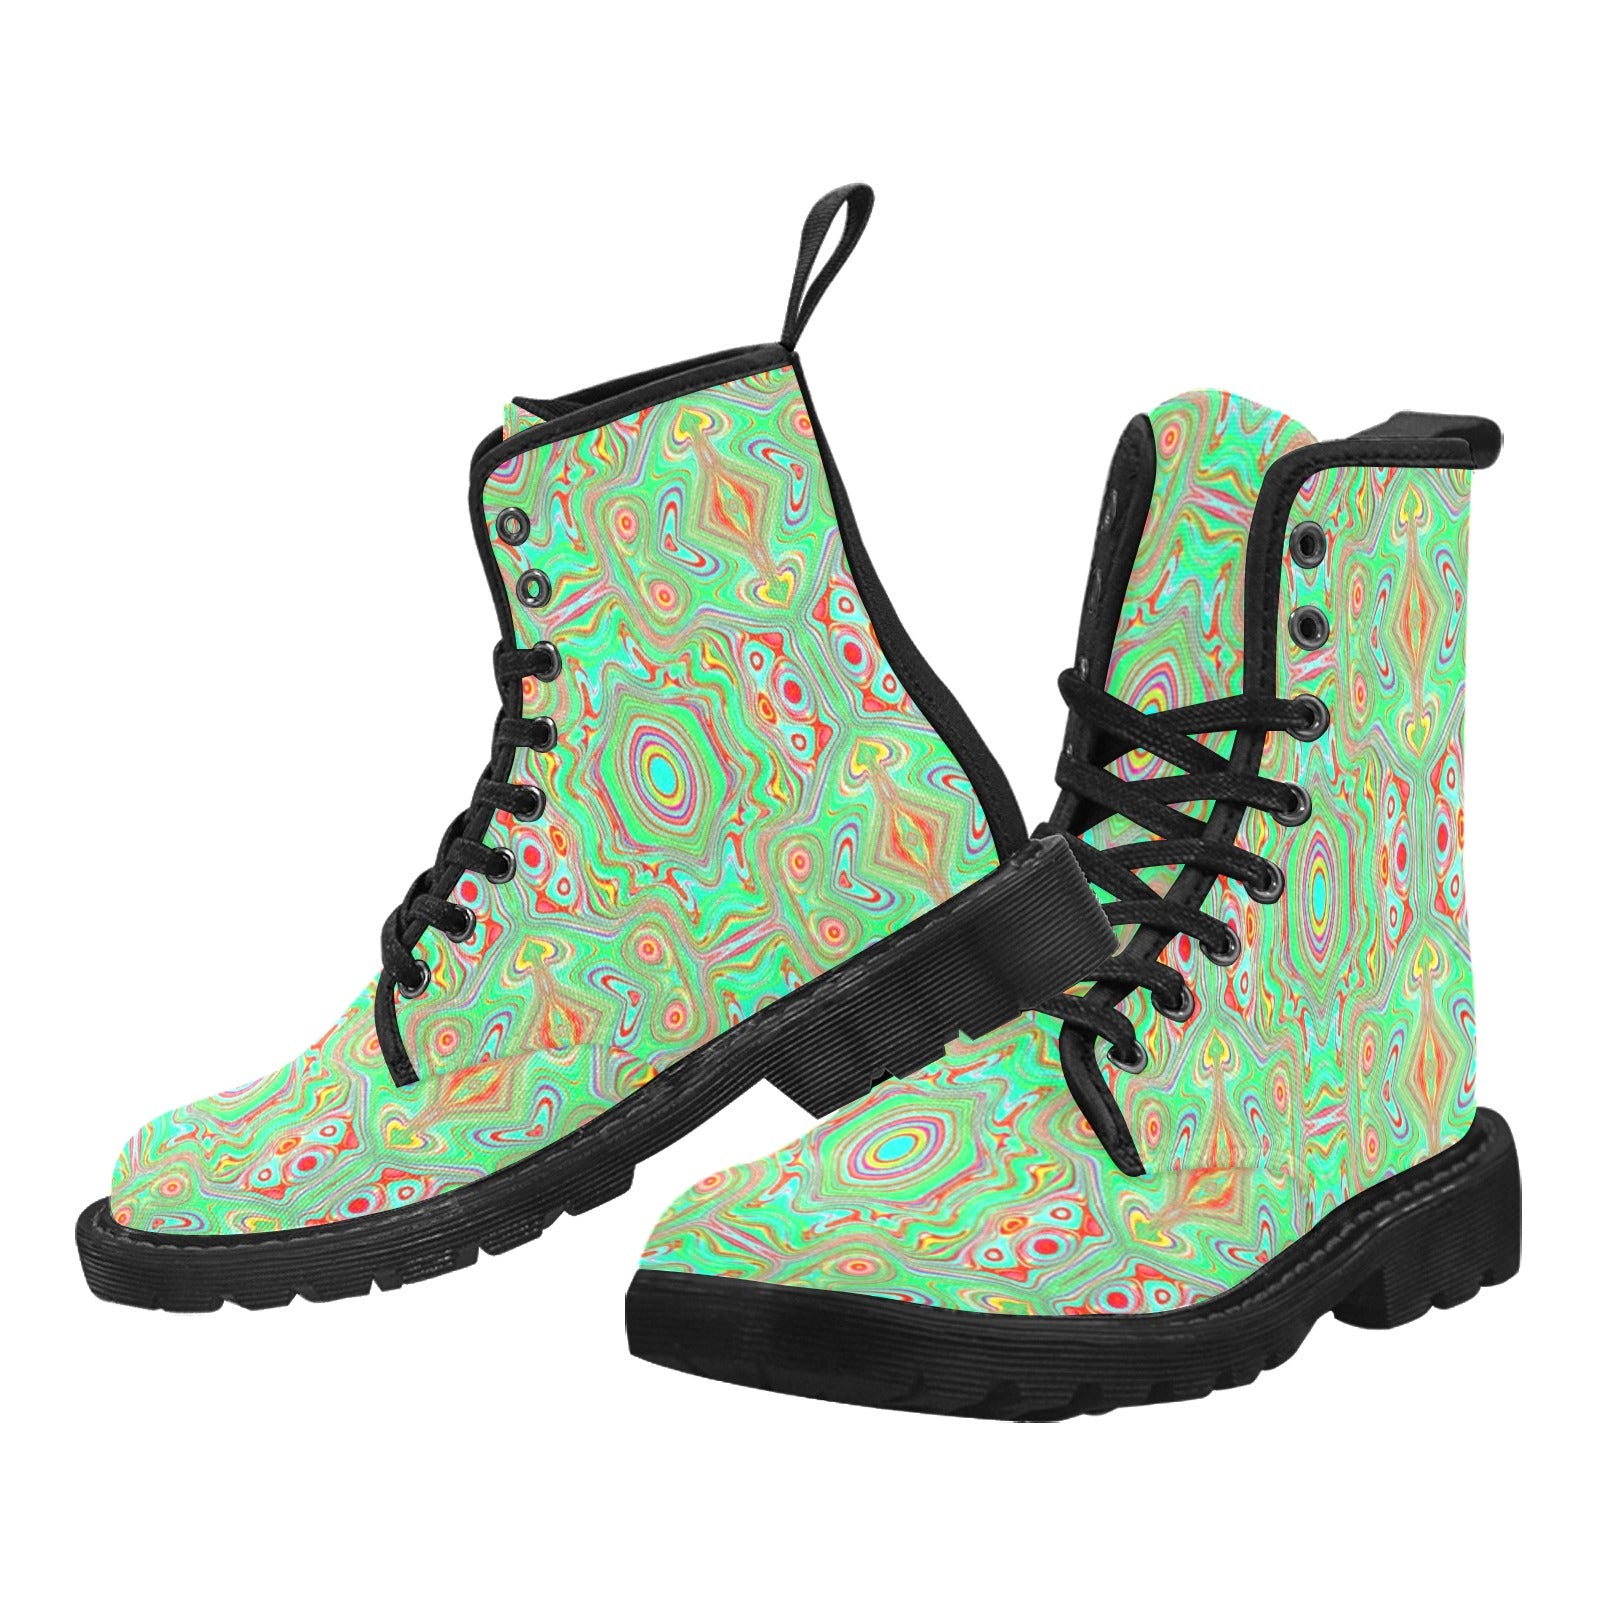 Boots for Women, Trippy Retro Orange and Lime Green Abstract Pattern - Black